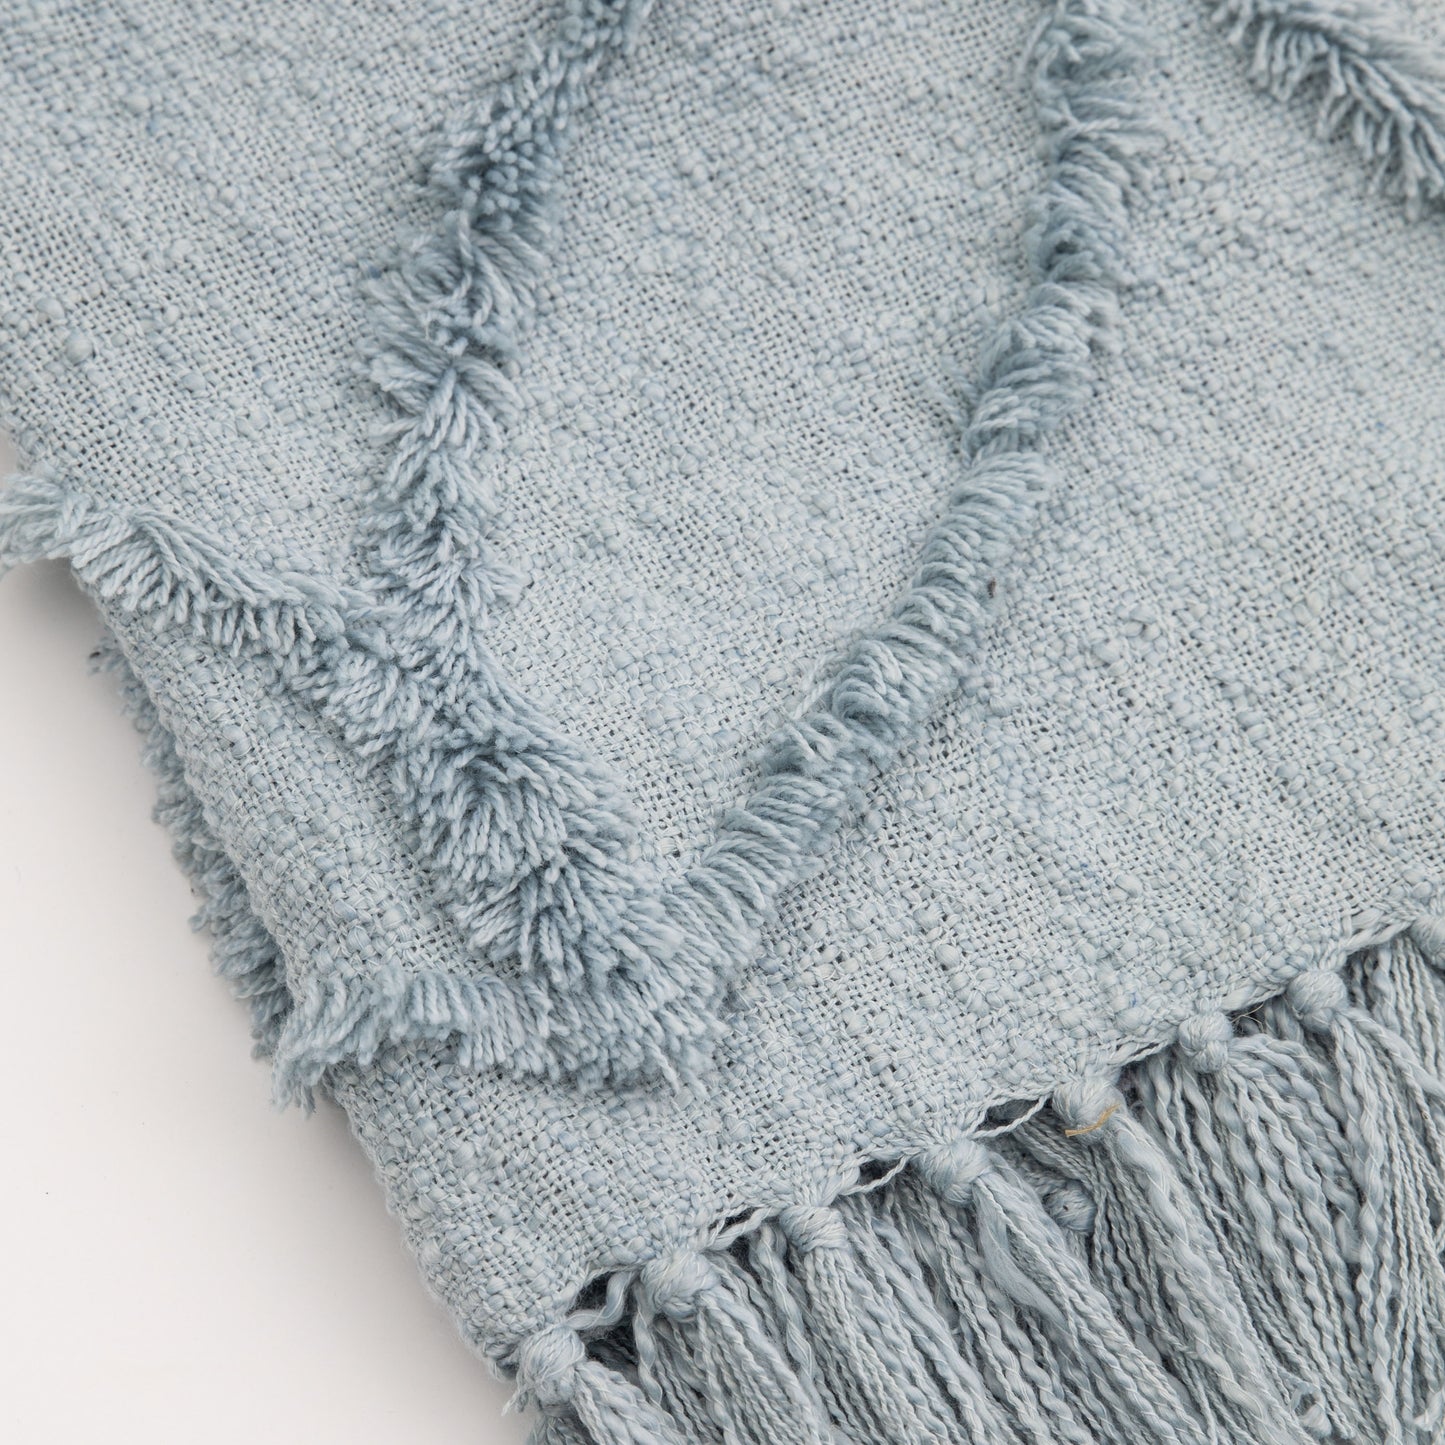 A SG Miami Tufted Throw Blue 1300x1700mm with fringes and tassels perfect for interior decor from Kikiathome.co.uk.